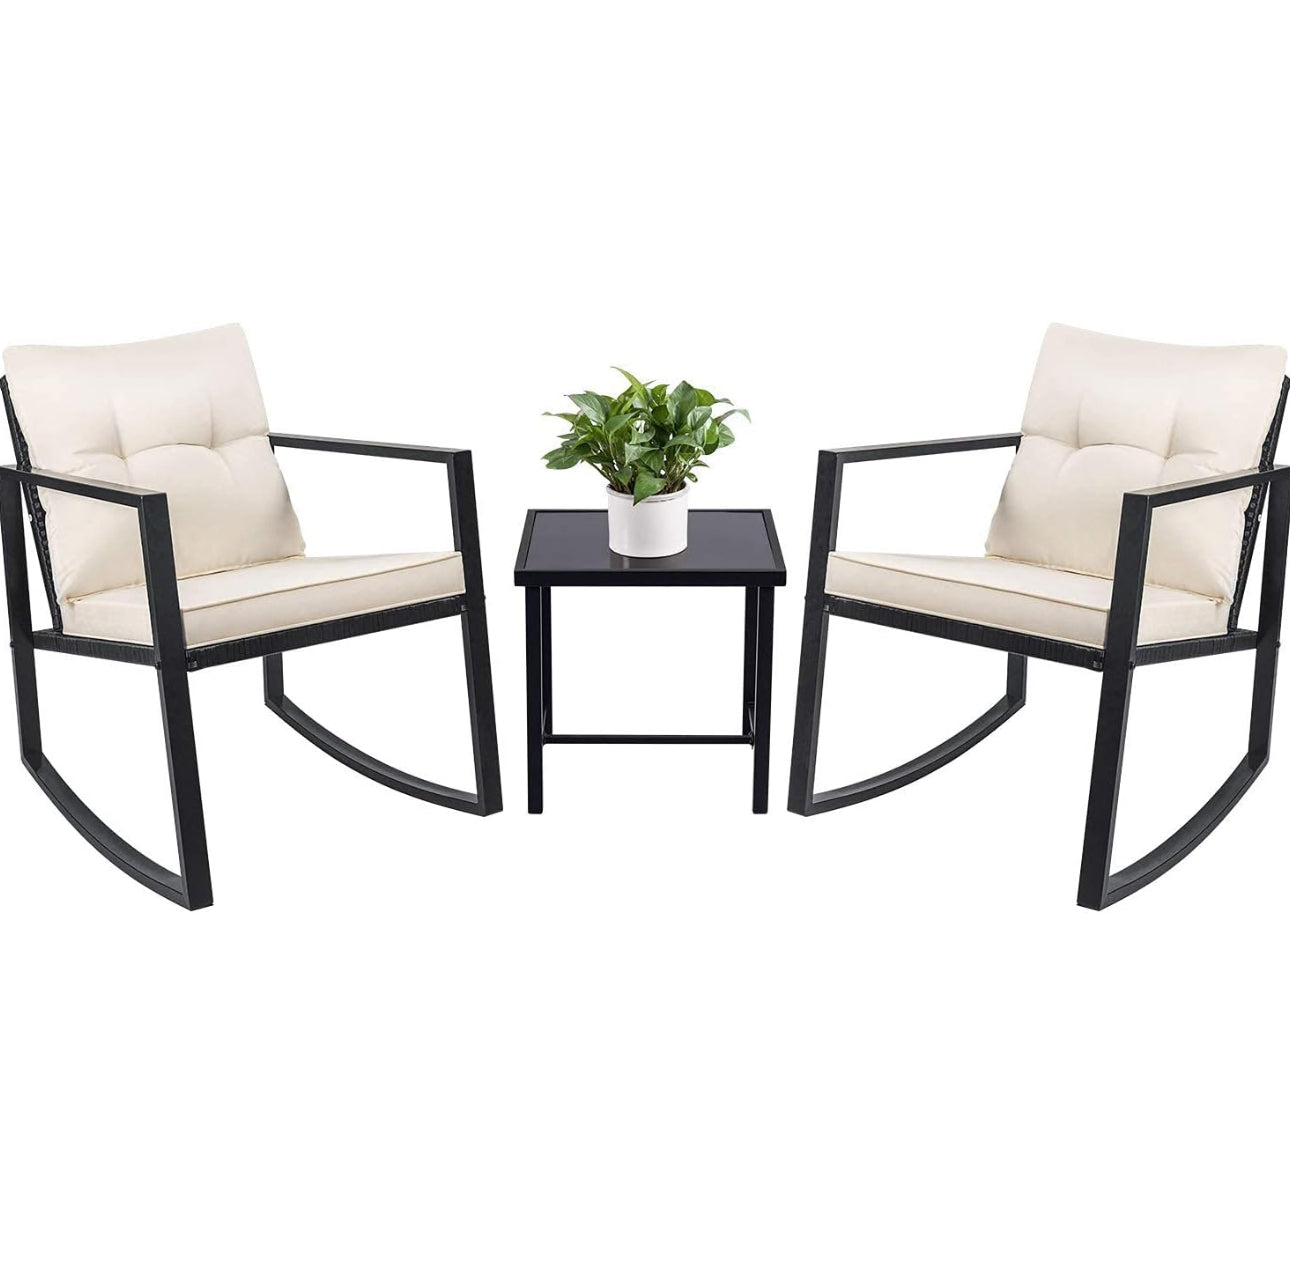 Patio rocking chairs and glass top table with cream cushions-Free shipping or local pickup